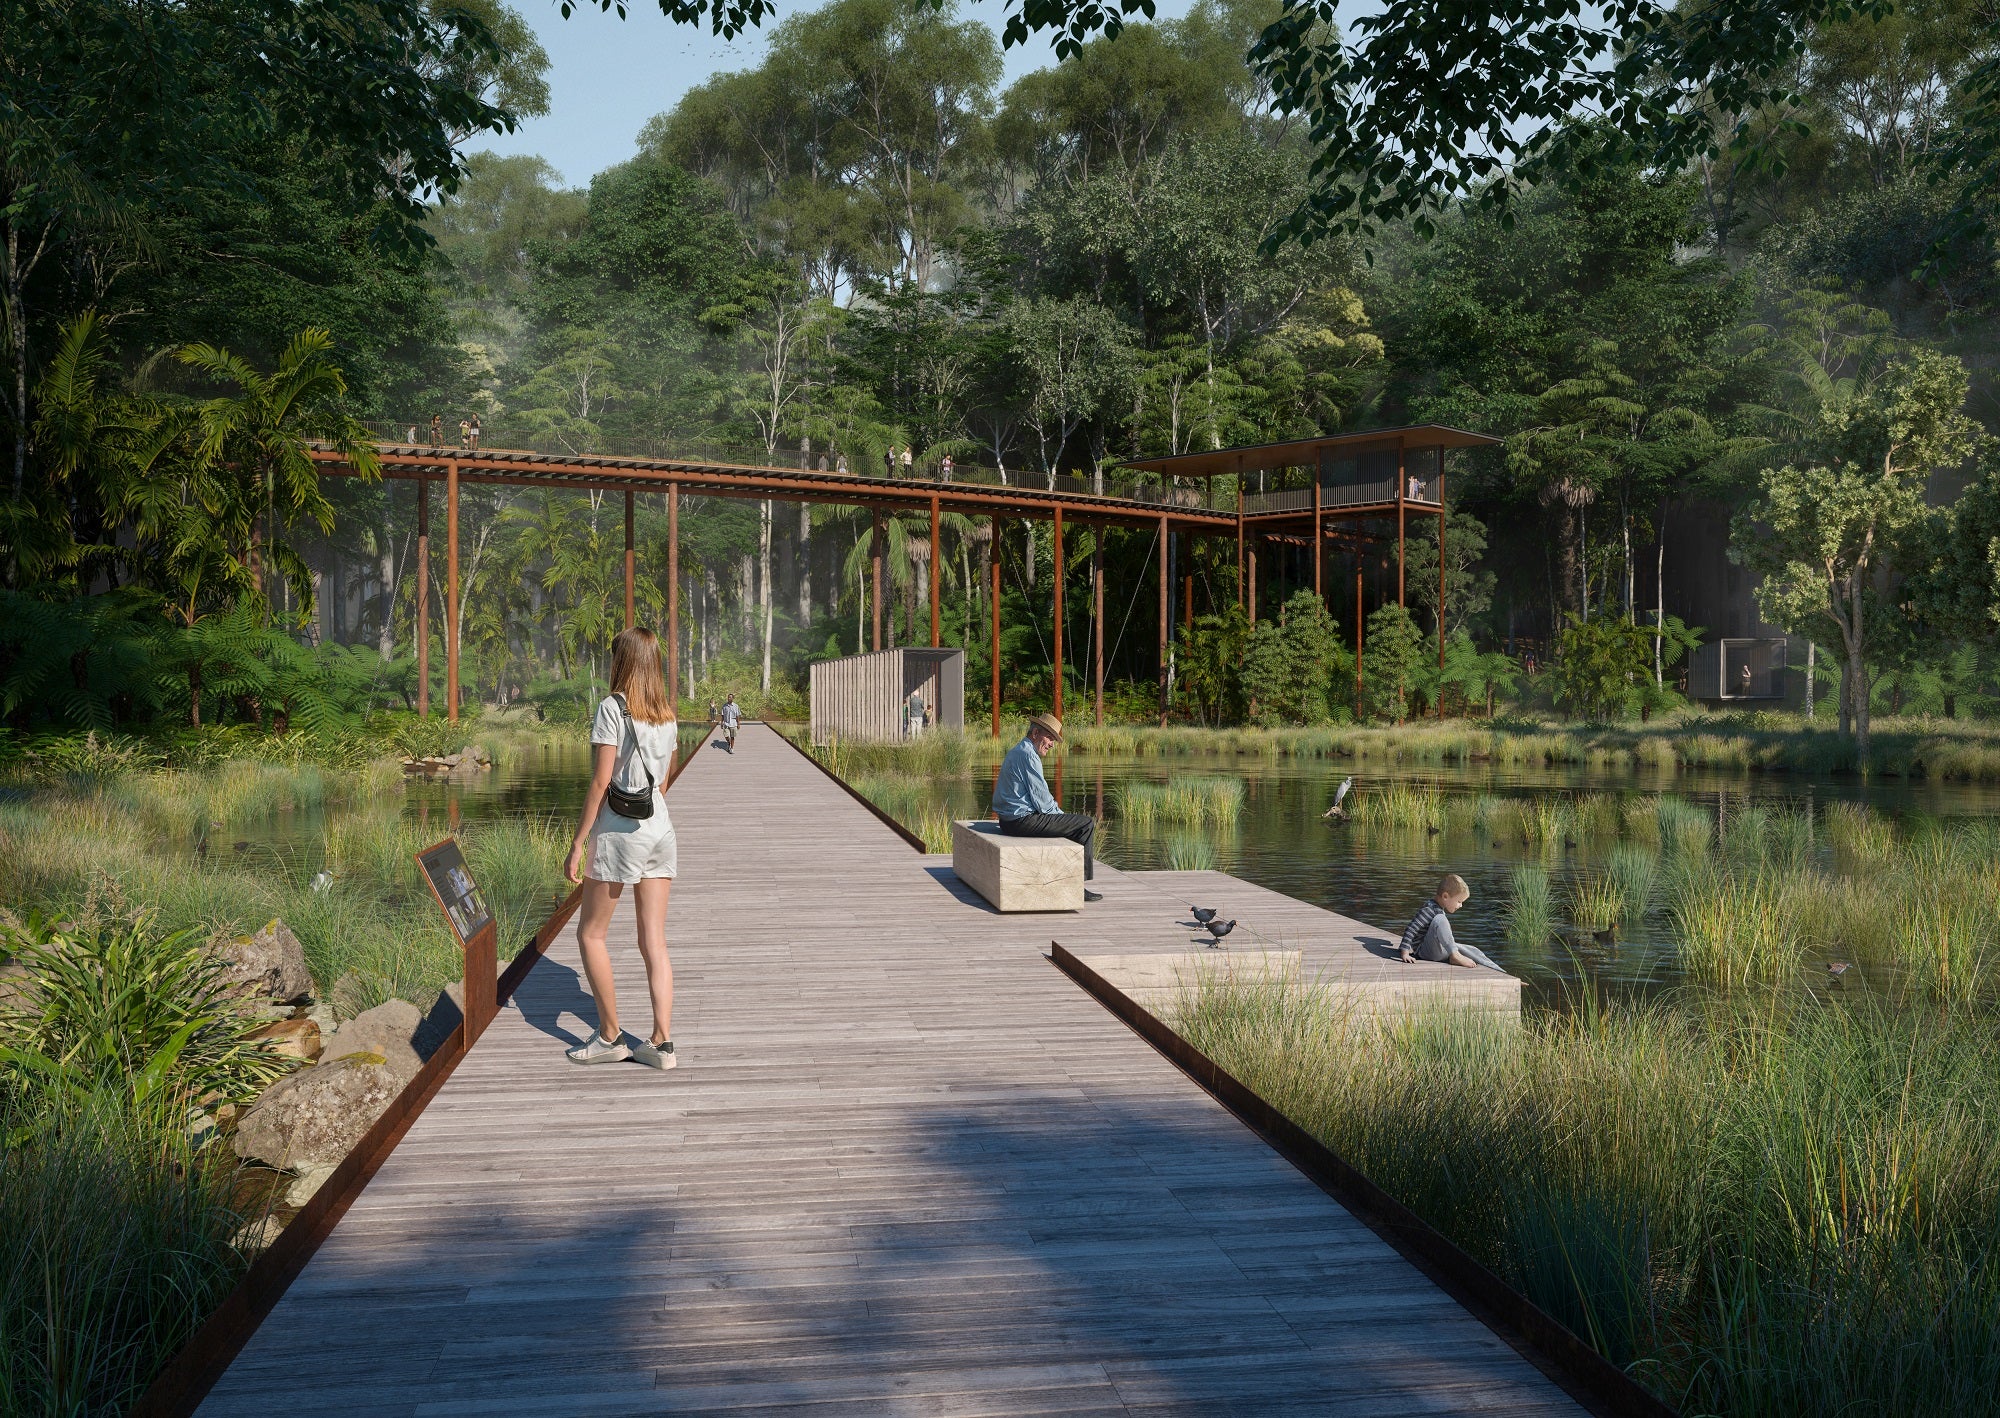 An artist impression of the Wetland Boardwalk and Treetop Bridge in the Sunshine Coast Ecological Park draft master plan. 